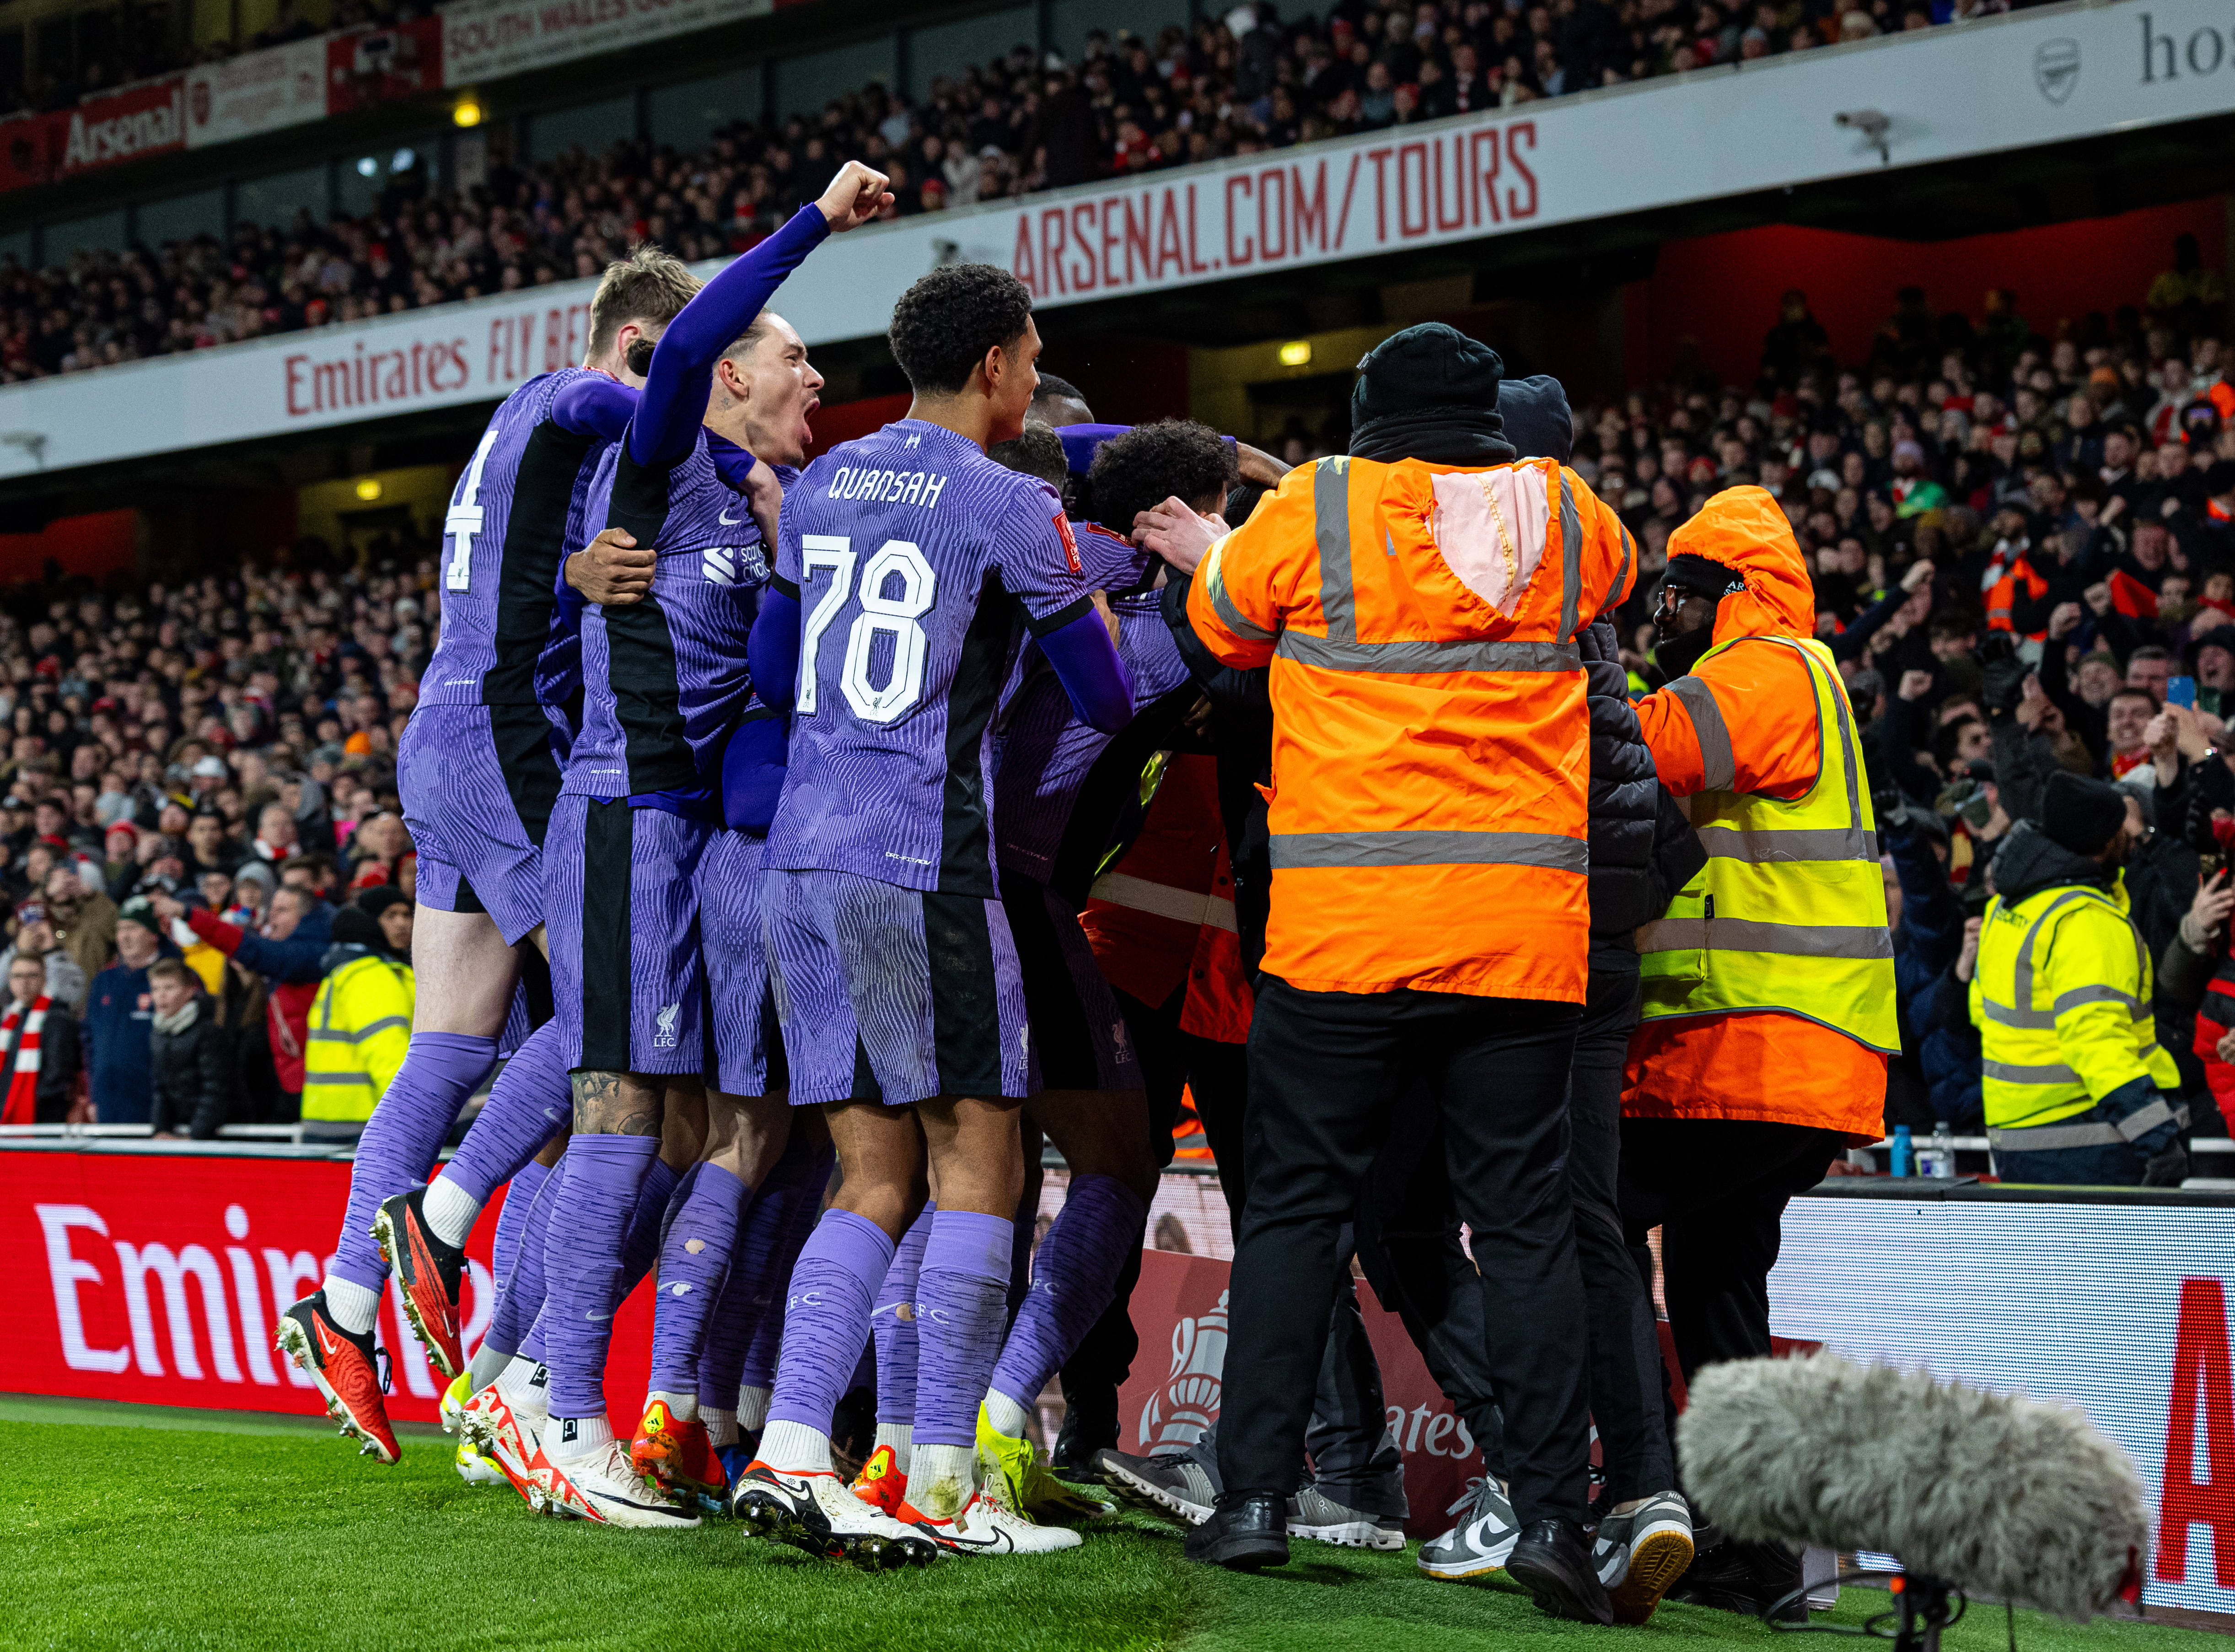 Liverpool's players pictured celebrating a goal during a 2-0 win at Arsenal in January 2024 while security staff at the Emirates Stadium attempt to remove a pitch invader from the field